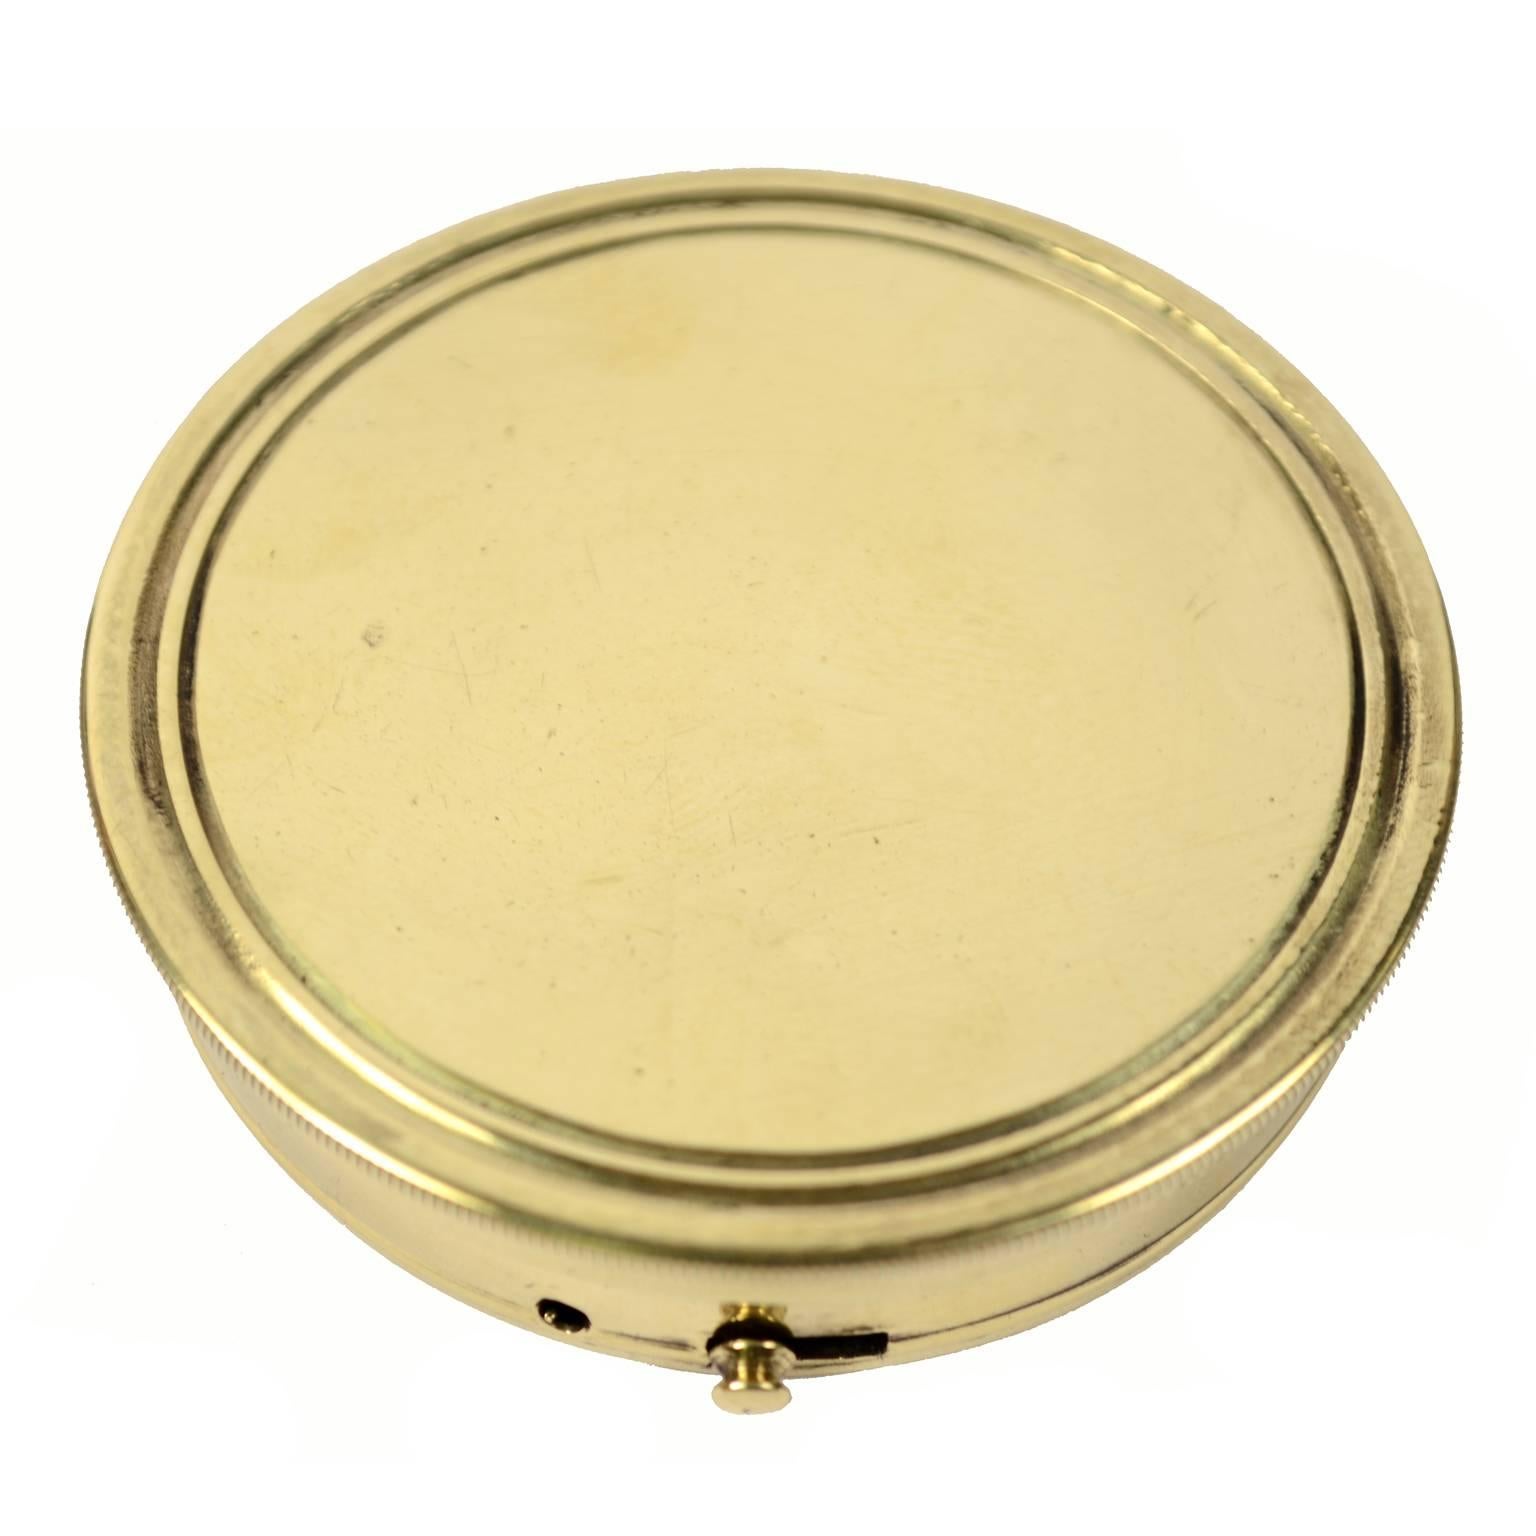 20th Century Small Travel Compass with Lid Made in Germany in the Early 1900s